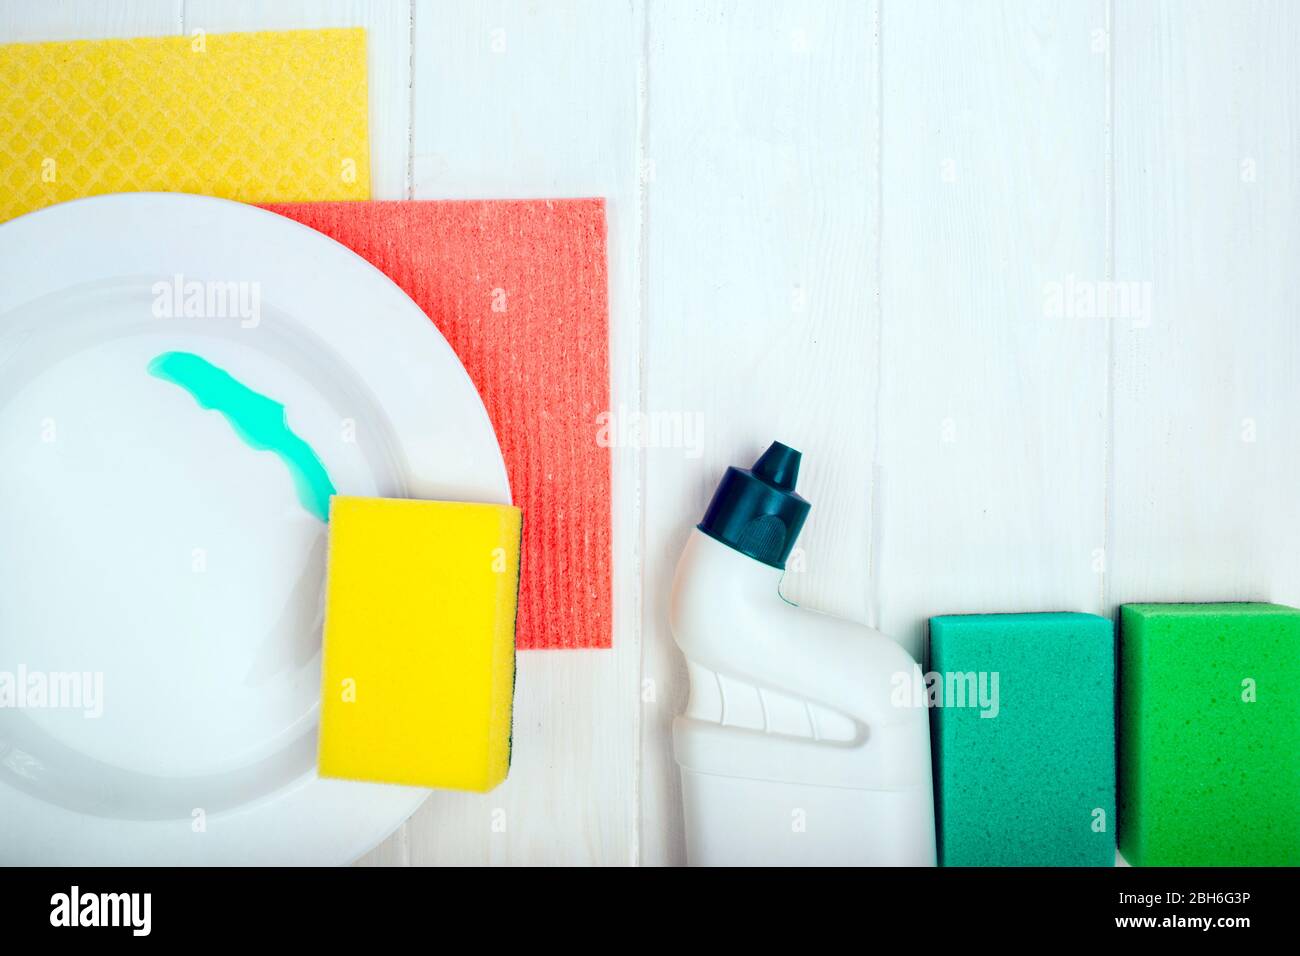 washing dishes and cleaning detergent on wooden table, top view Stock Photo